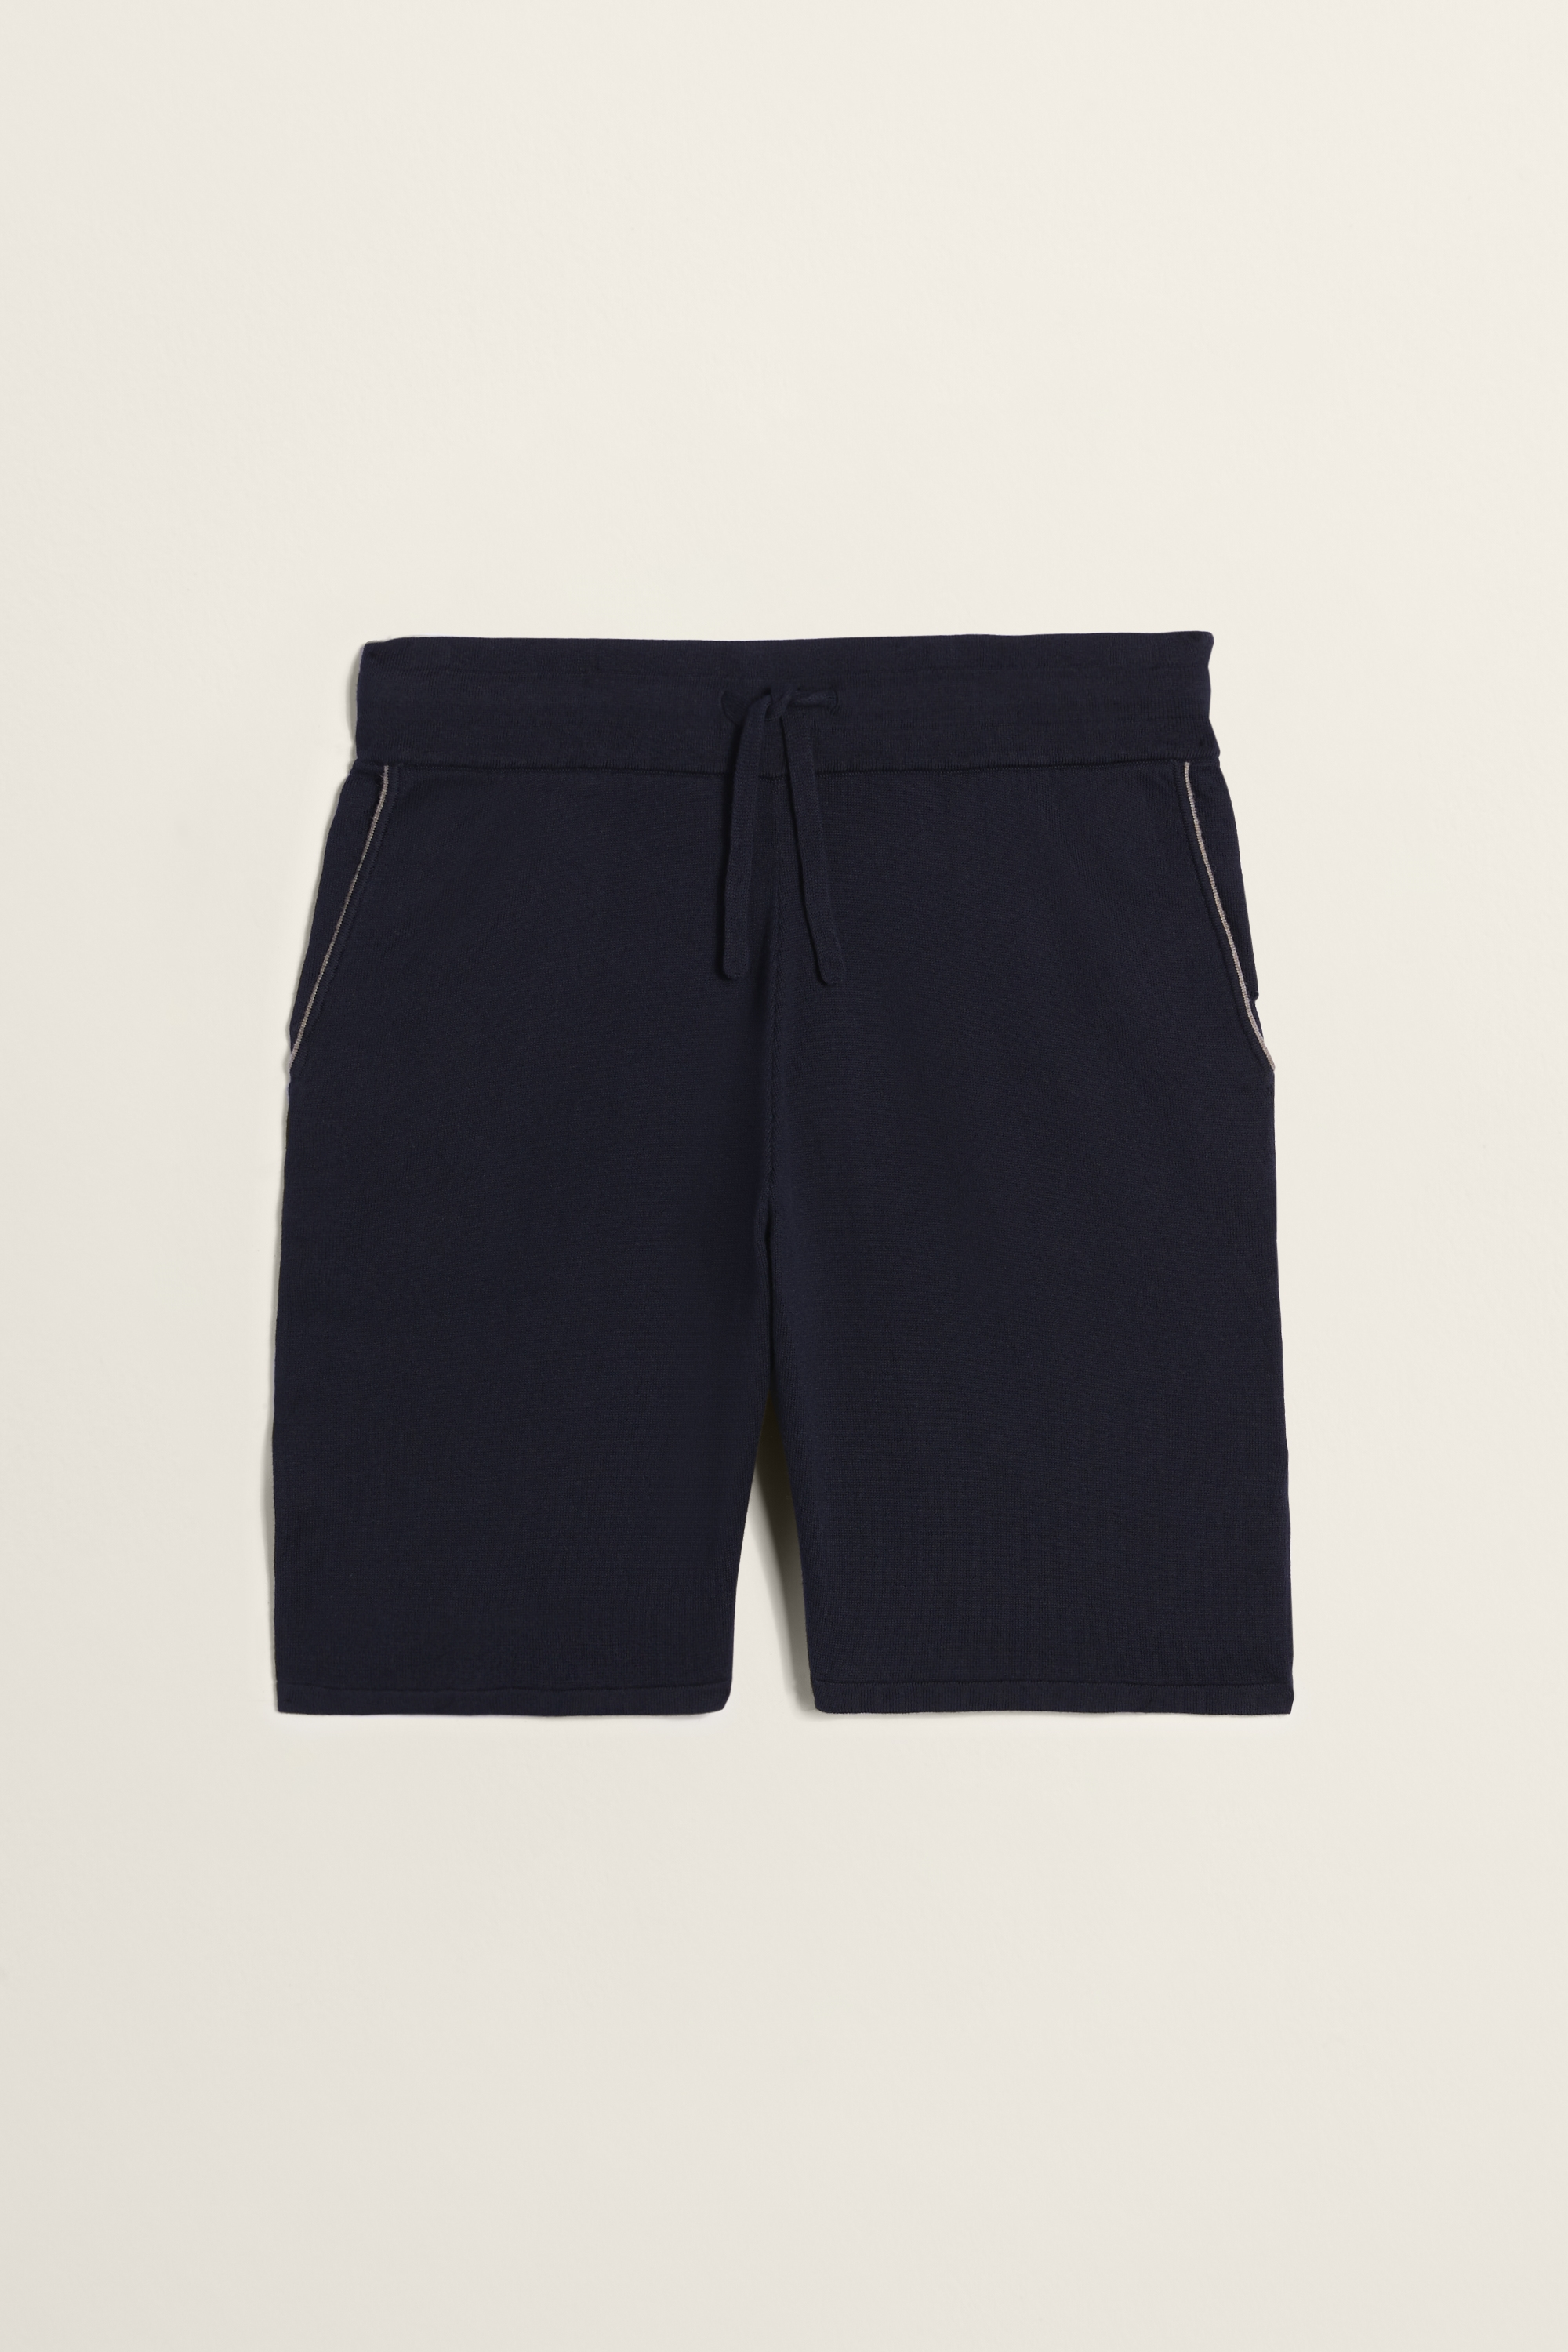 Navy Cotton-Cashmere Shorts | Buy Online at Moss